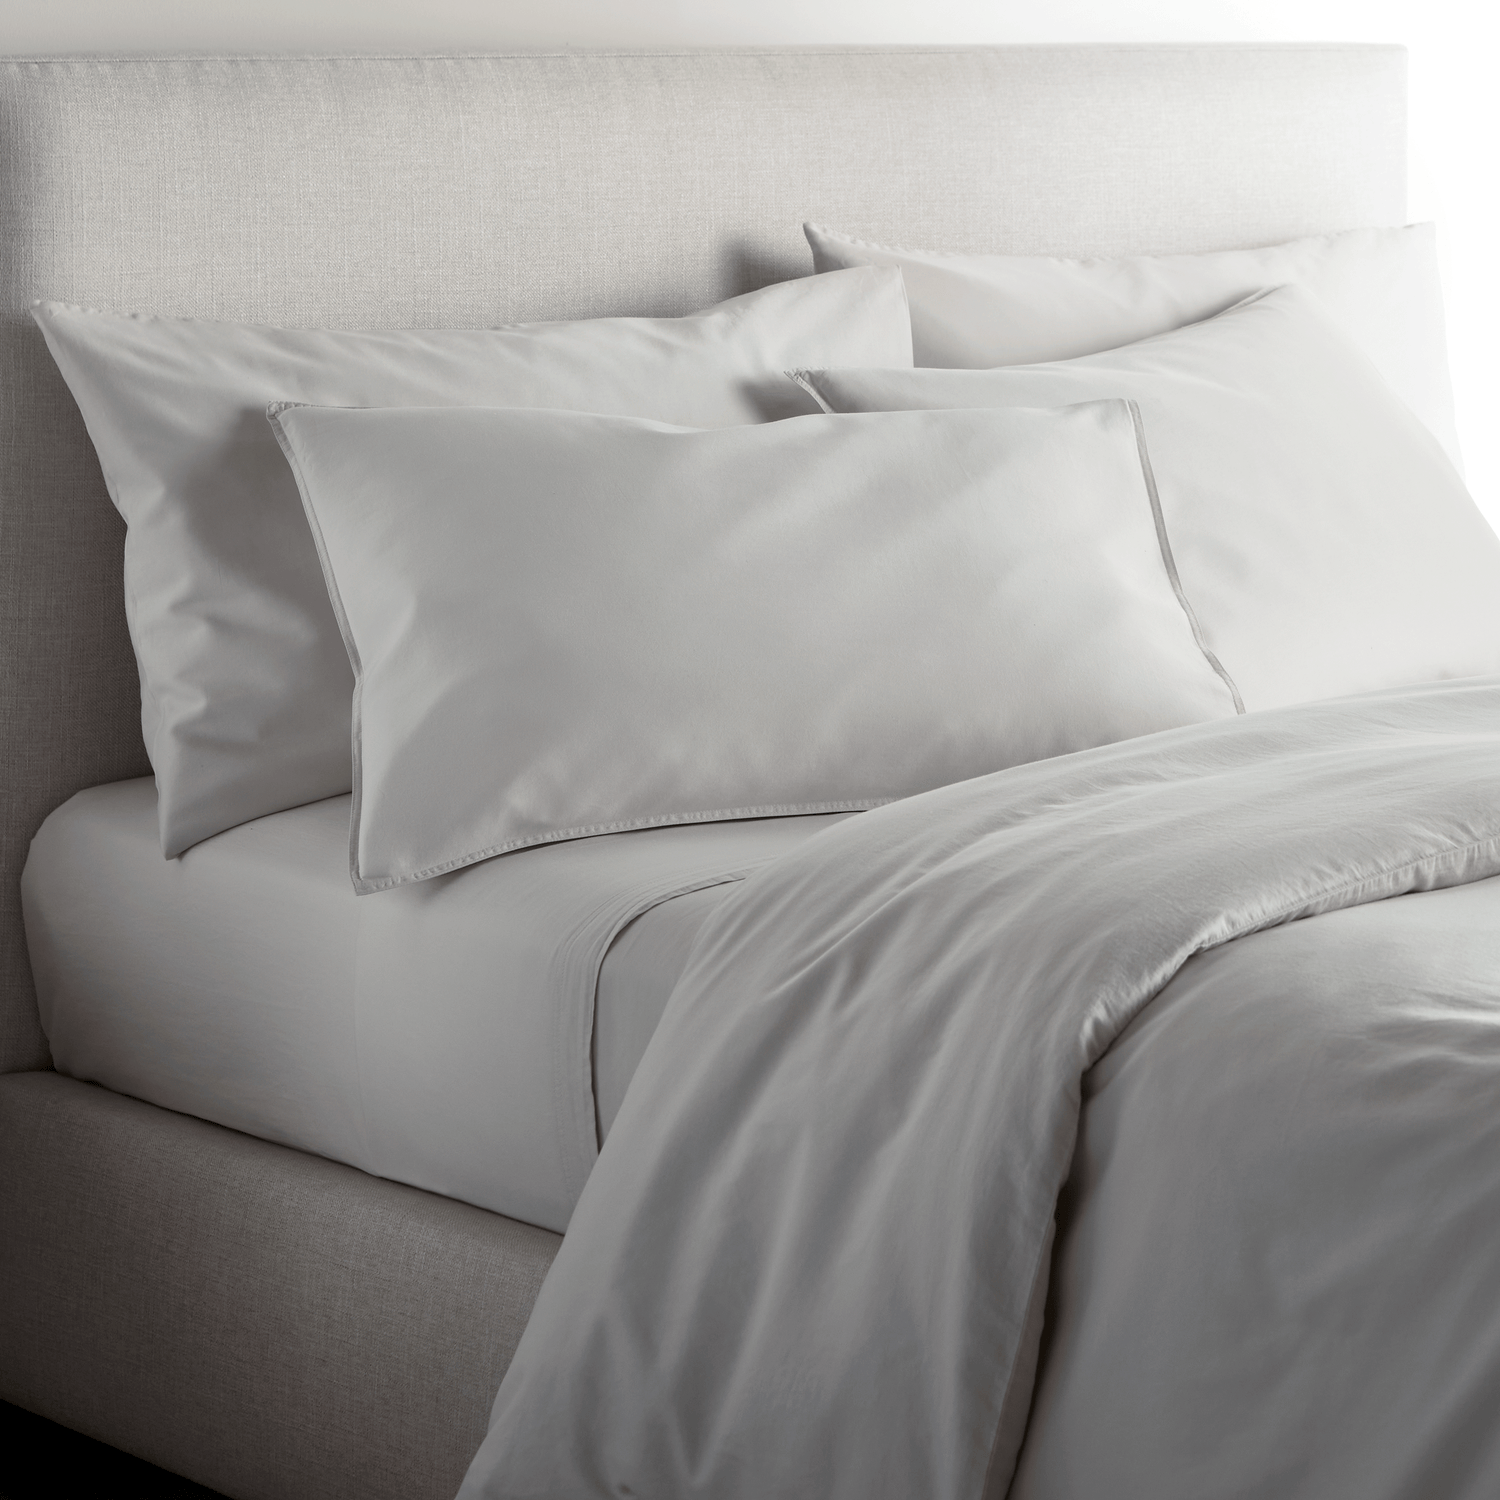 Produced in Portugal exclusively for Elte, The Stonewashed Sateen Collection is crafted using long-staple cotton that has been stonewashed, which results in a luxuriously soft text